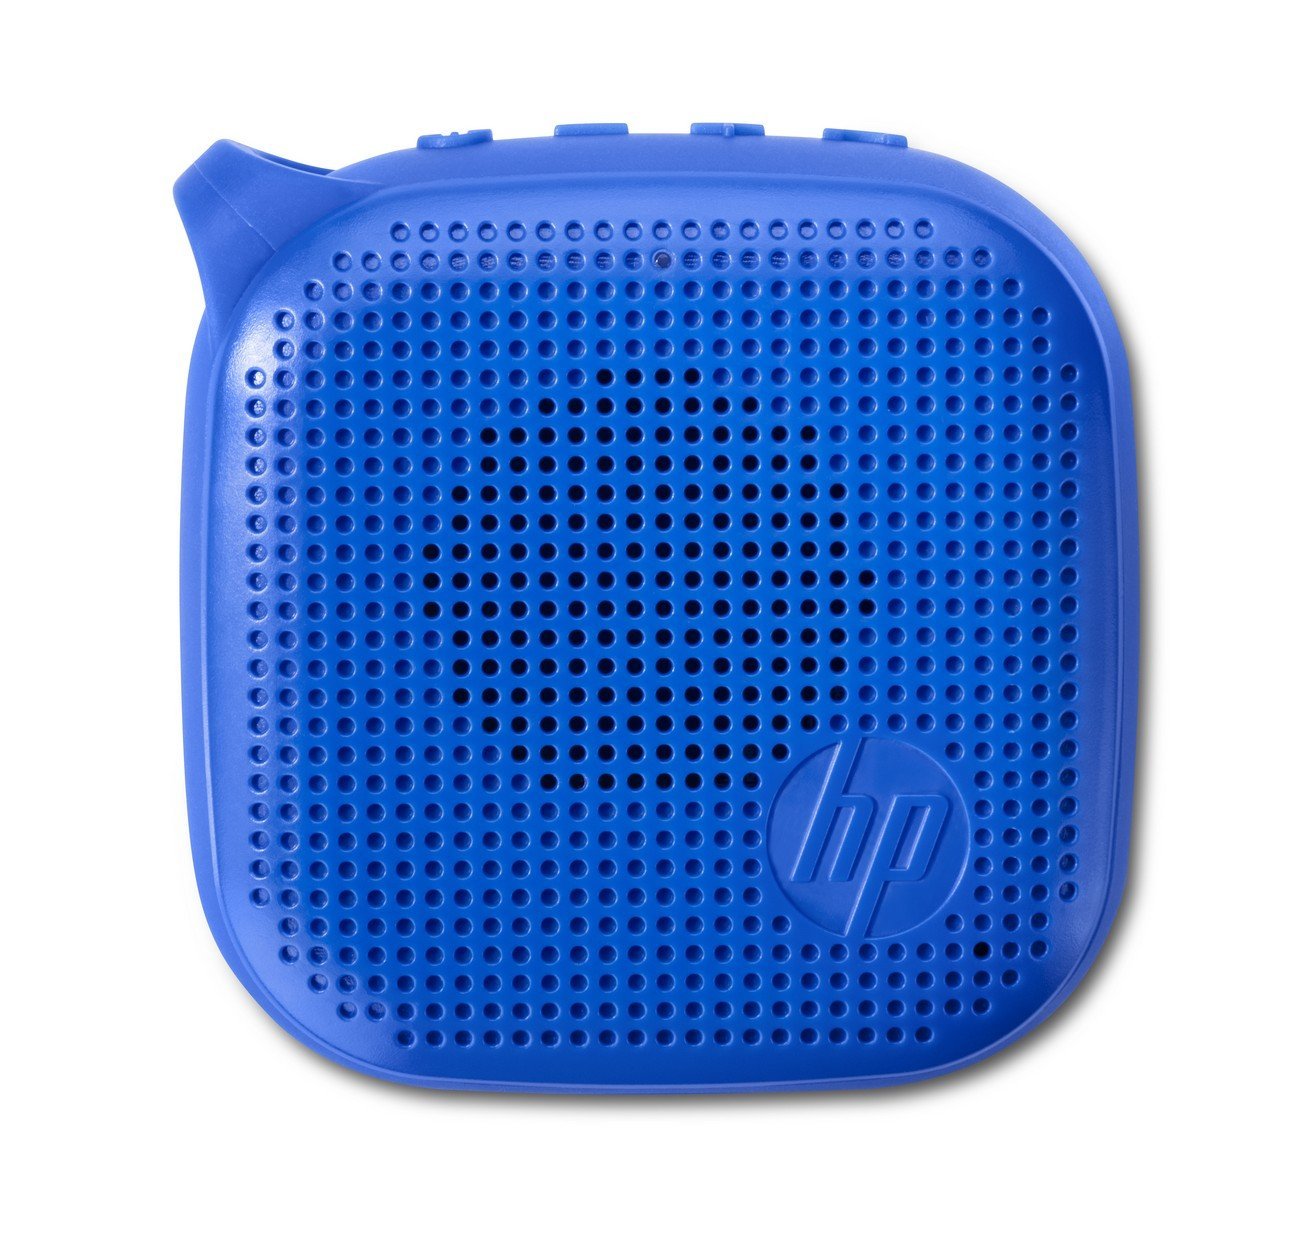 Amazon: Buy HP Mini 300 Bluetooth Speakers (Blue) at Rs 949 only